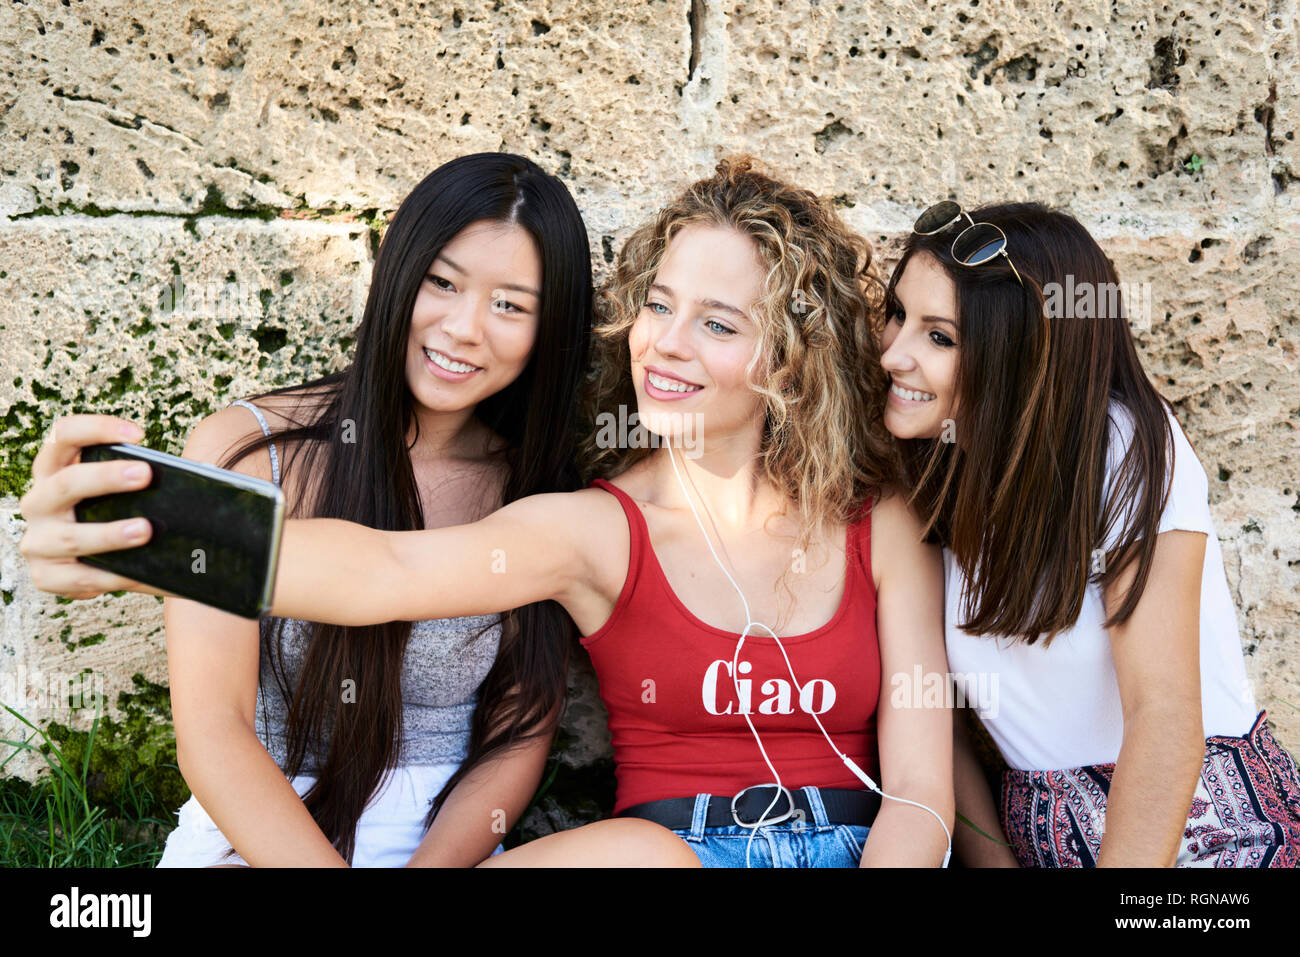 Three smiling young women sitting at stone wall taking a selfie Stock Photo